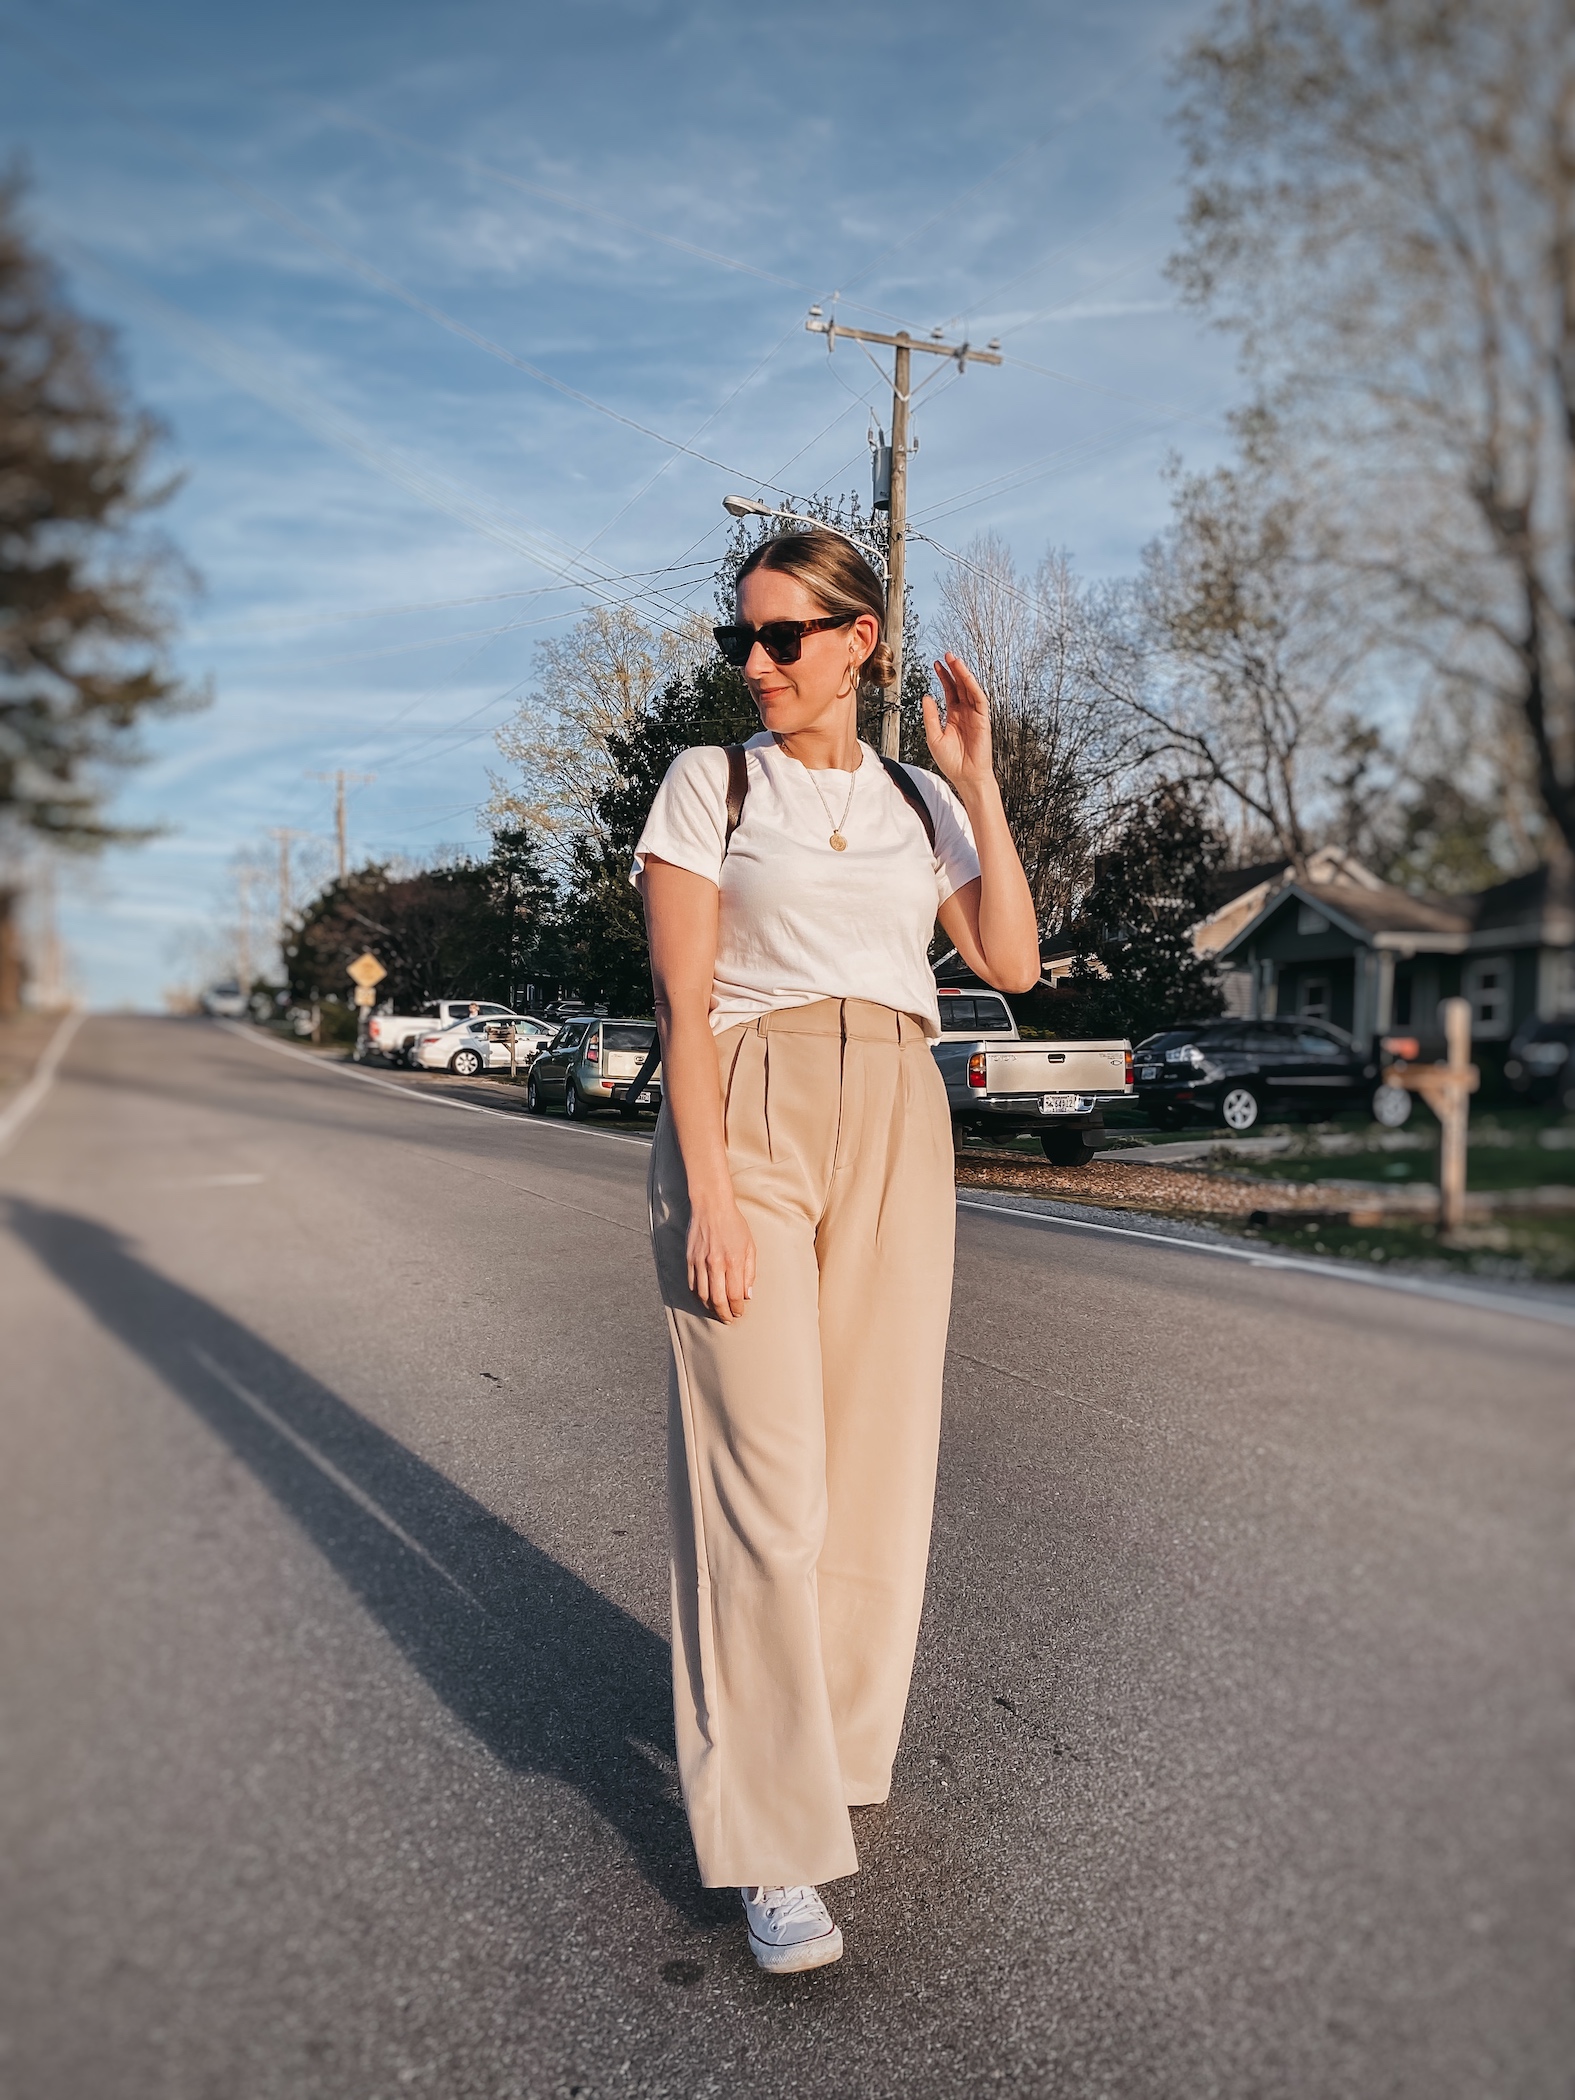 Wide Leg Pants with Oxford Shoes Outfits (7 ideas & outfits)